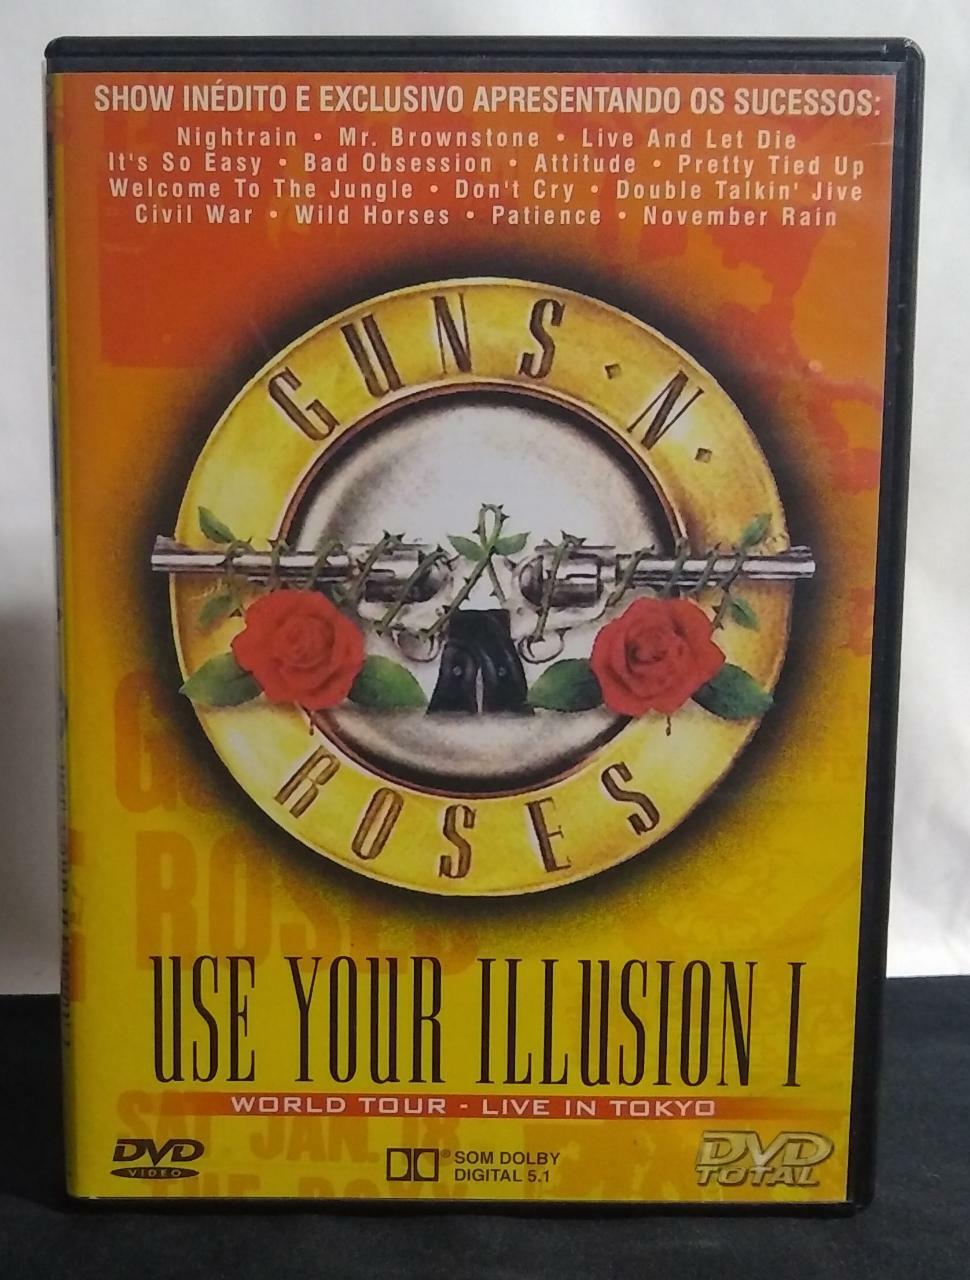 DVD - Guns and Roses - Use Your Illusion I - World Tour Live In Tokyo